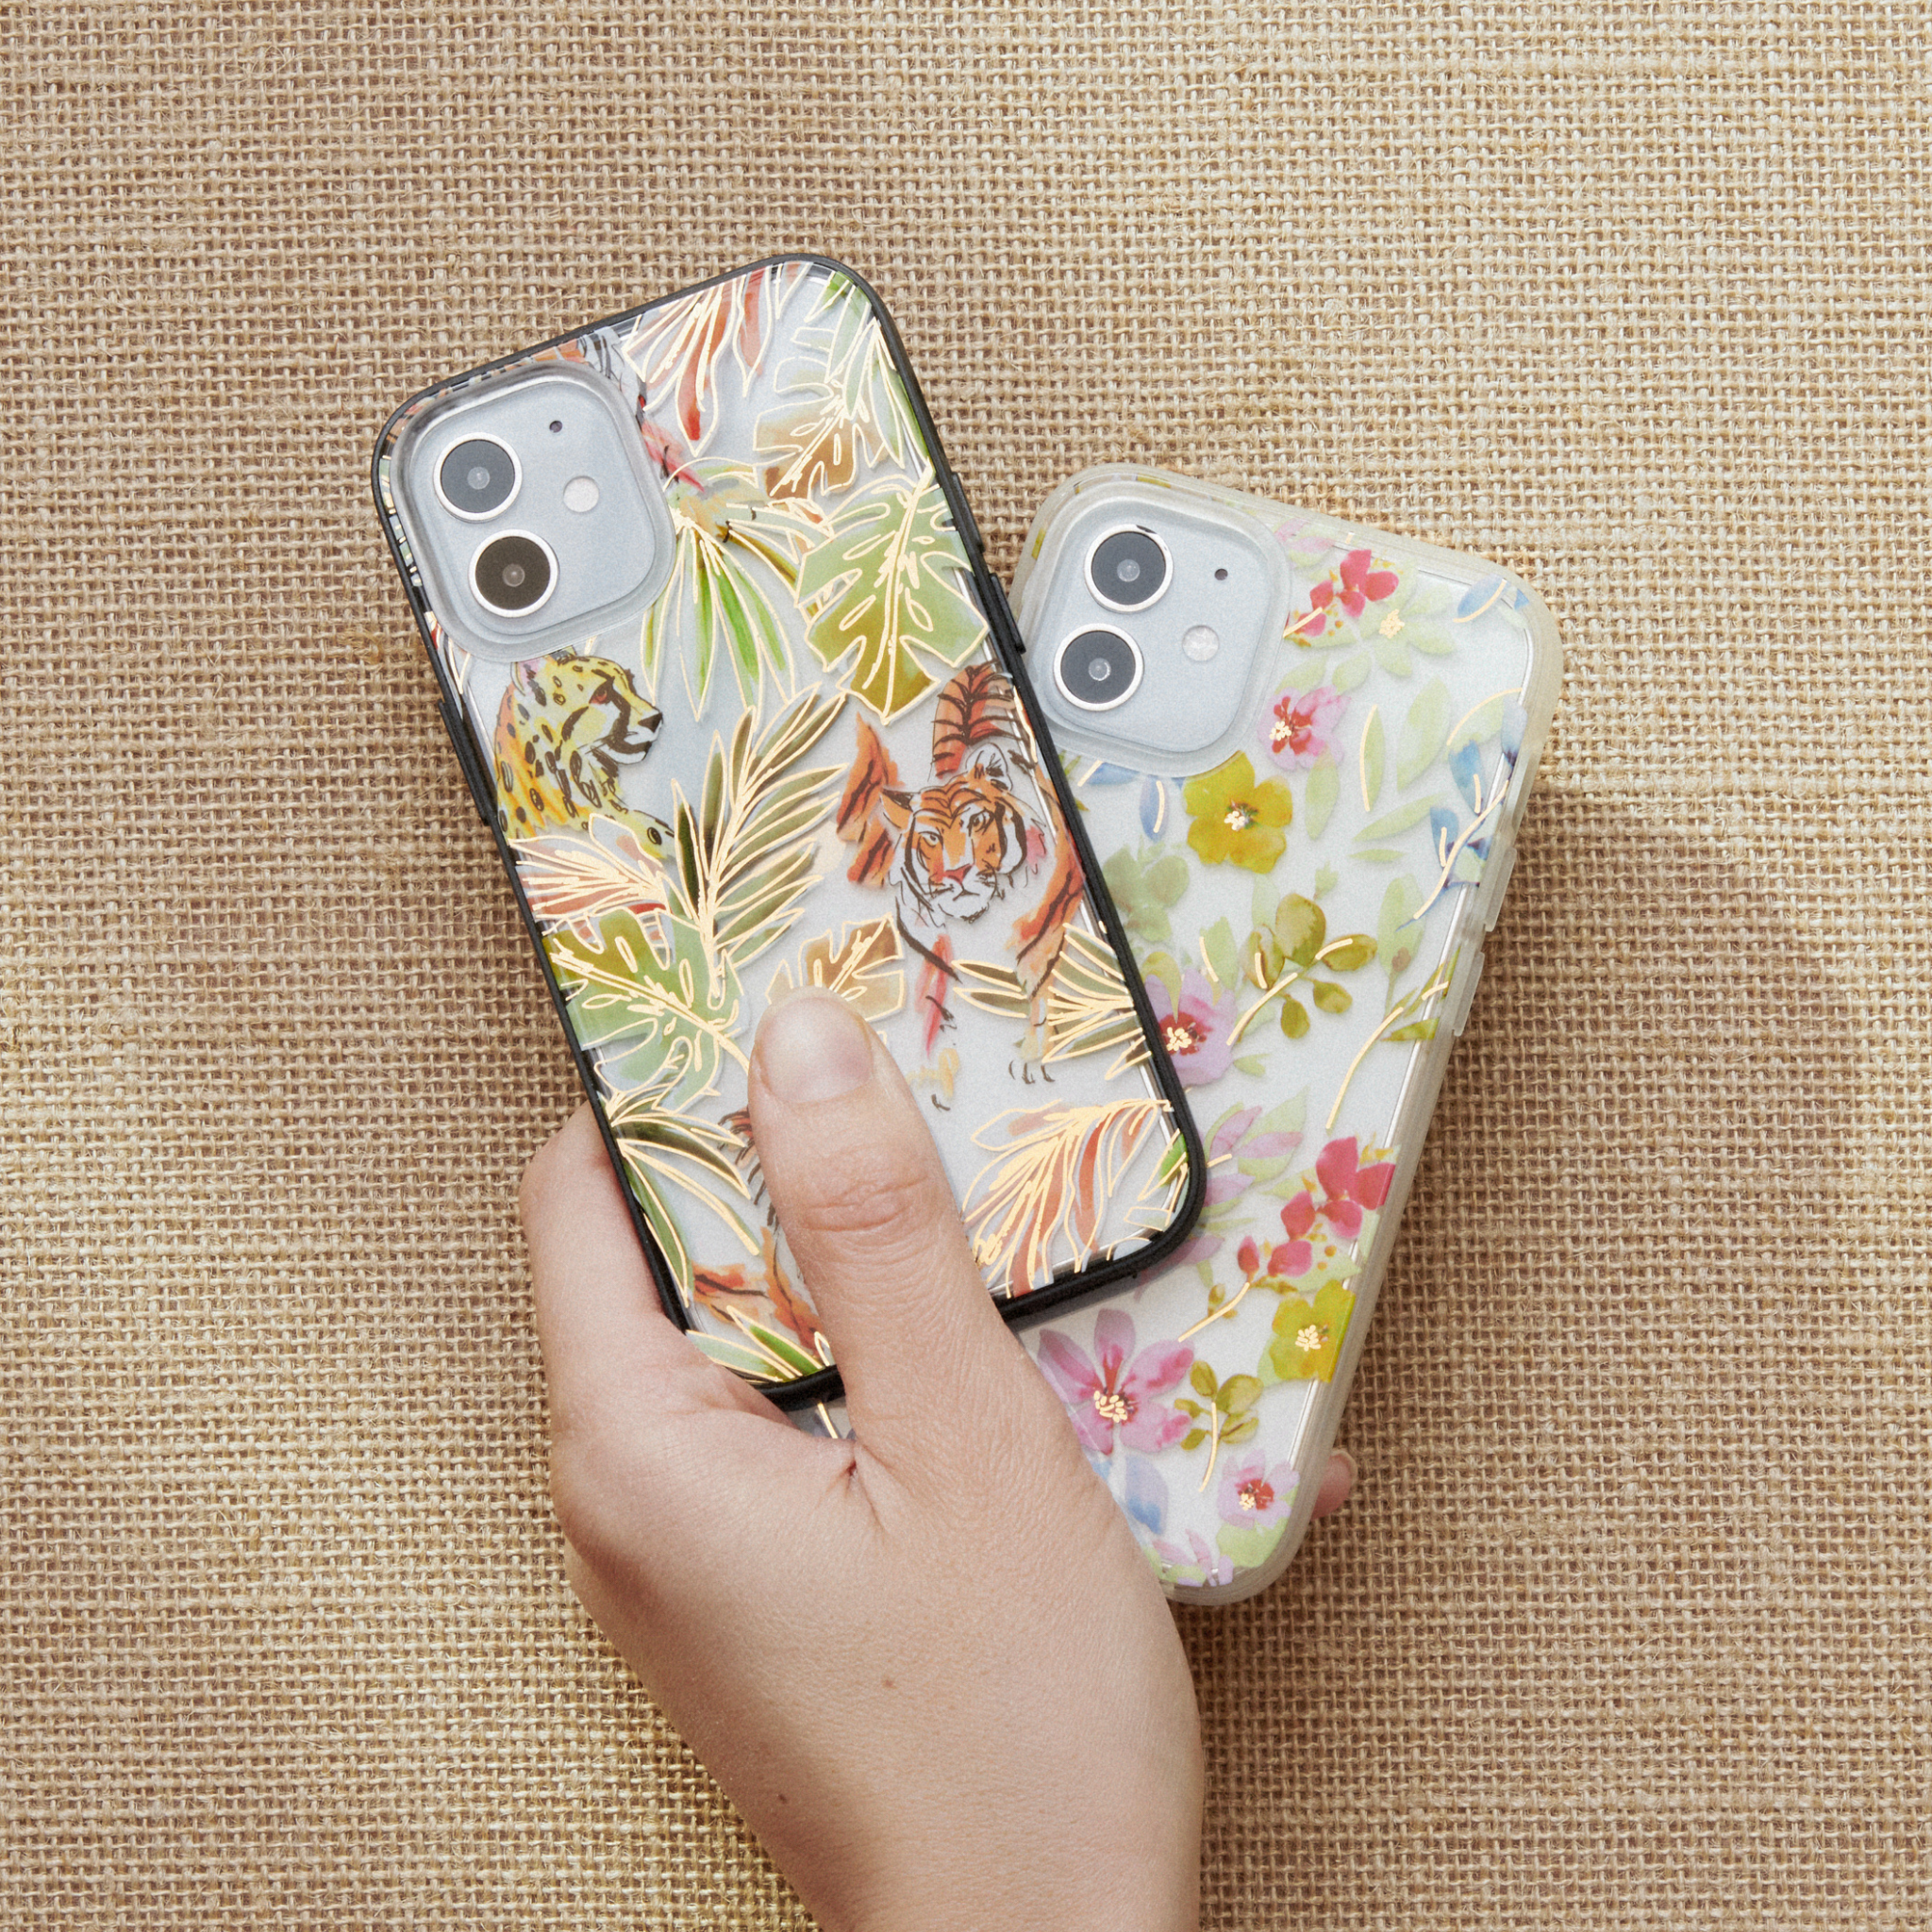 watercolor print of jungle cats with gold foil embroidered shown on an iphone